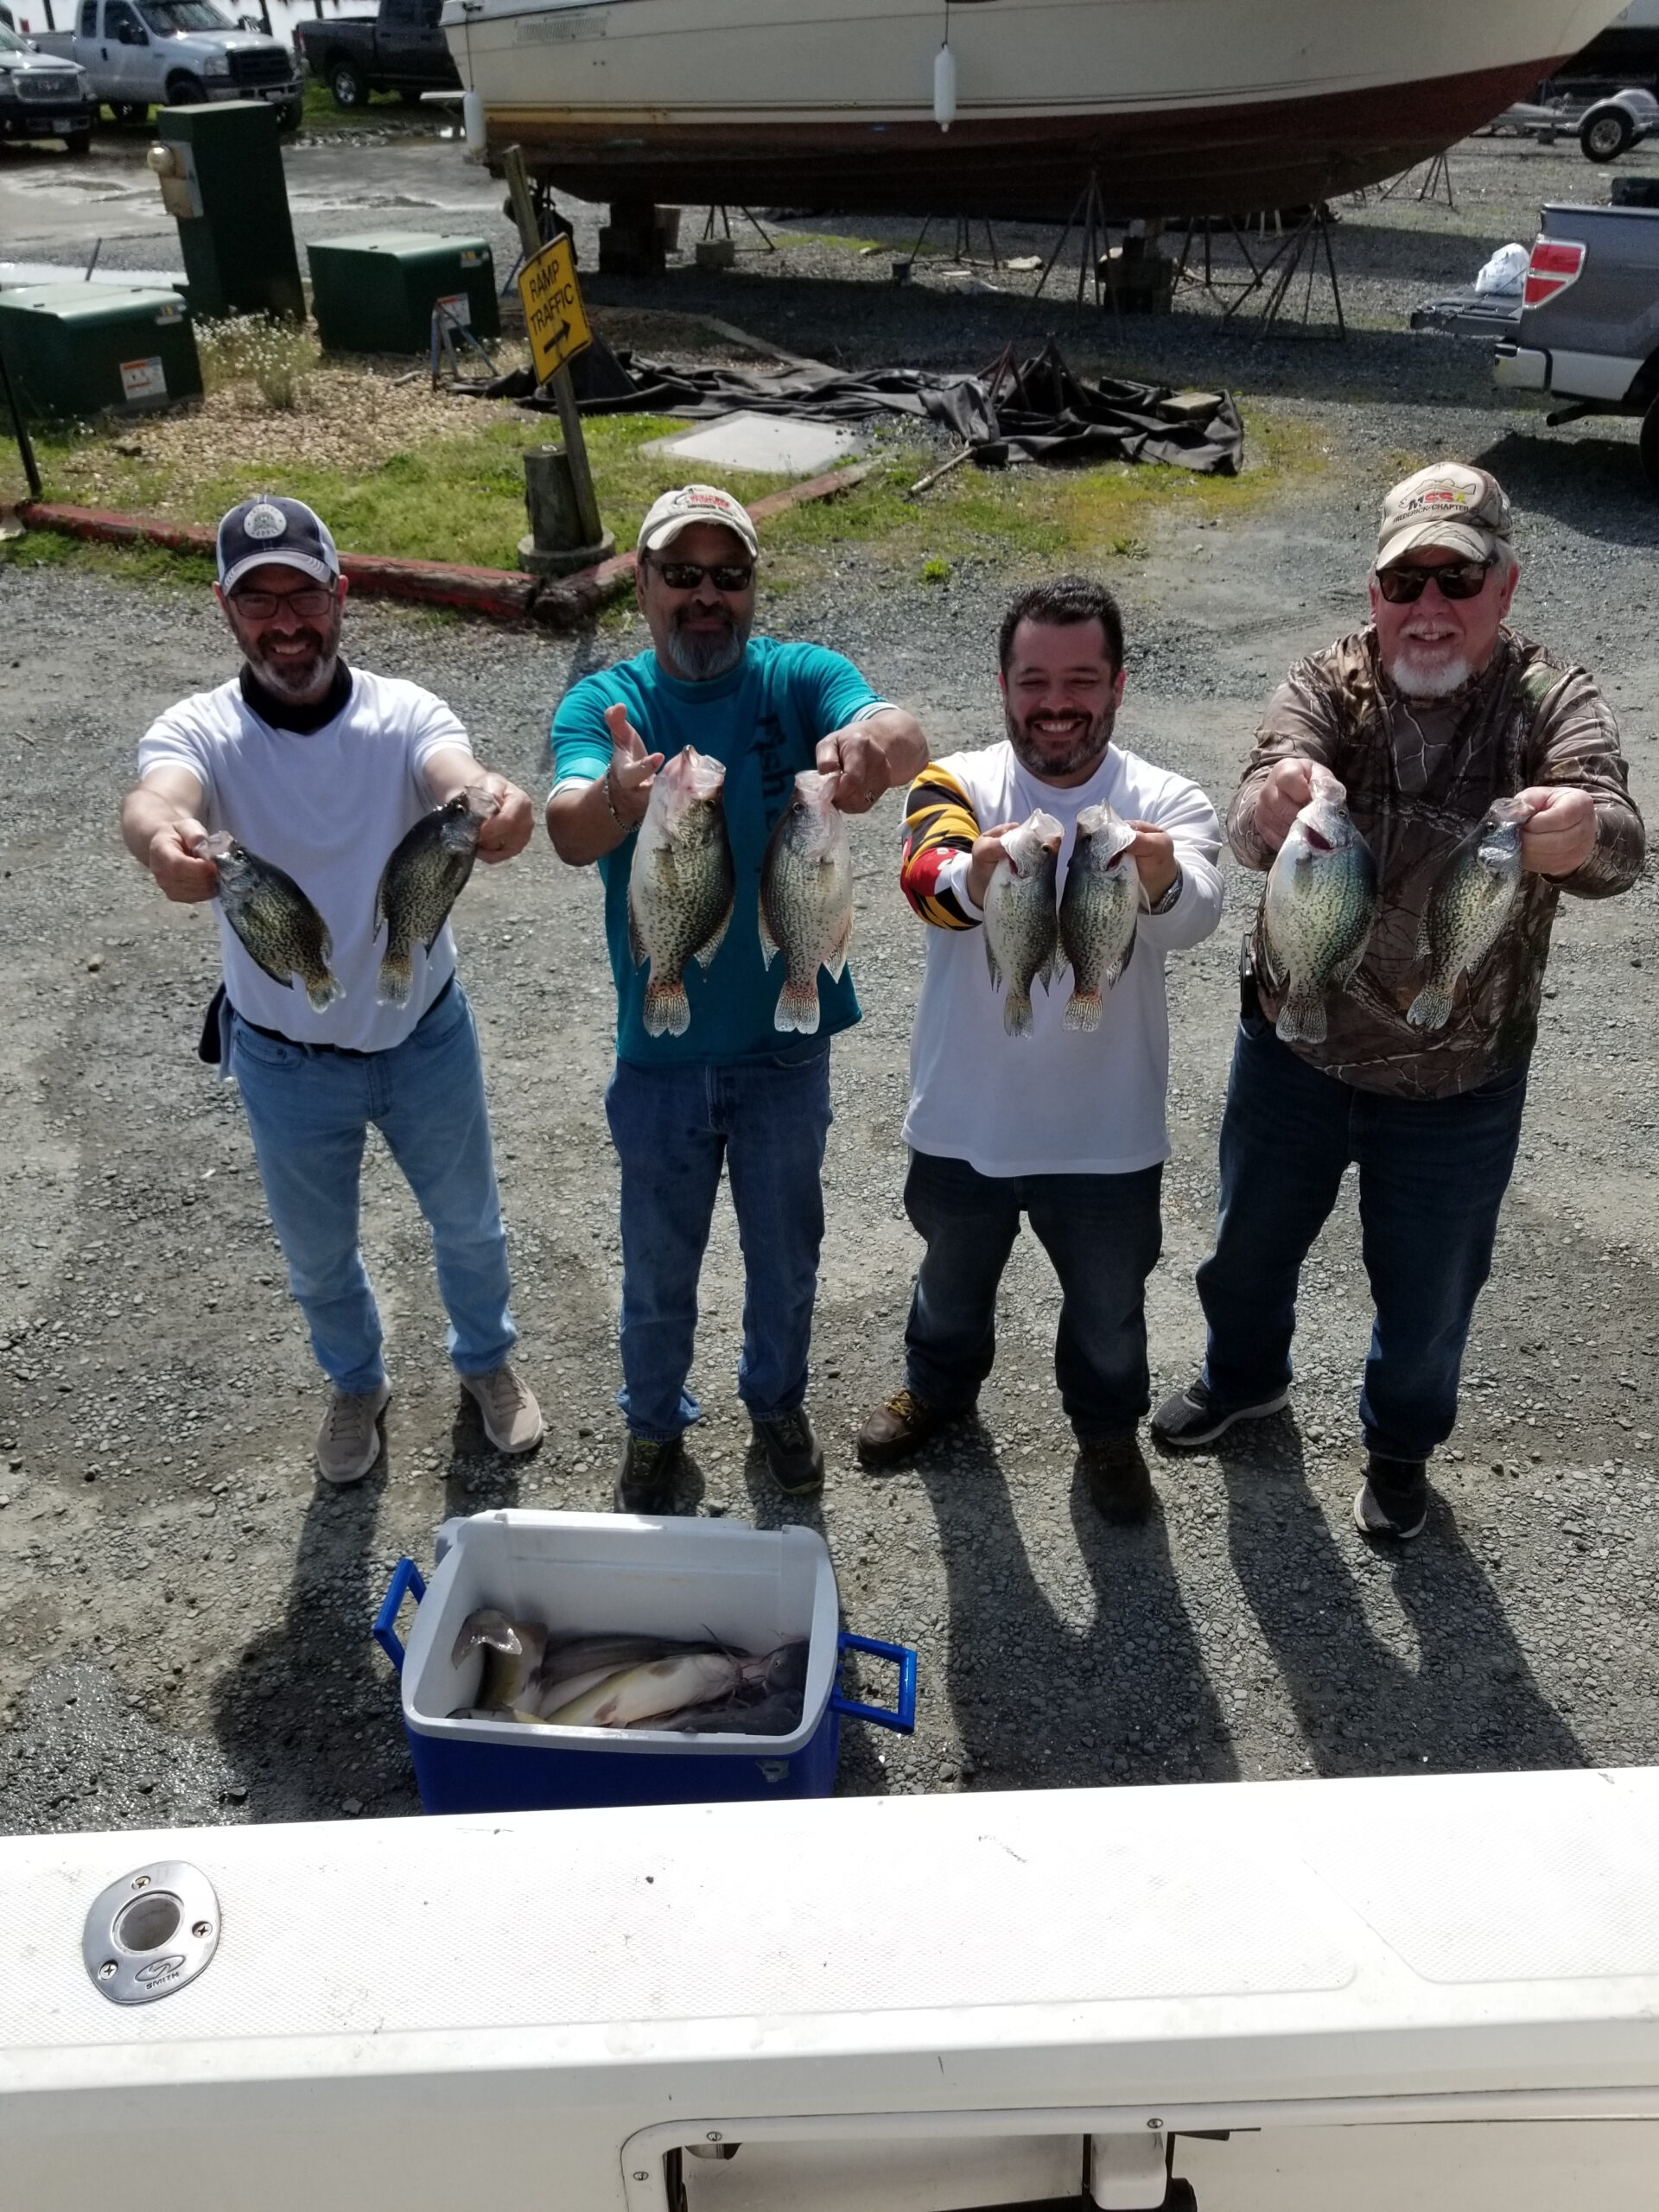 https://indianheadcharters.com/wp-content/uploads/2021/04/41021-scaled.jpg